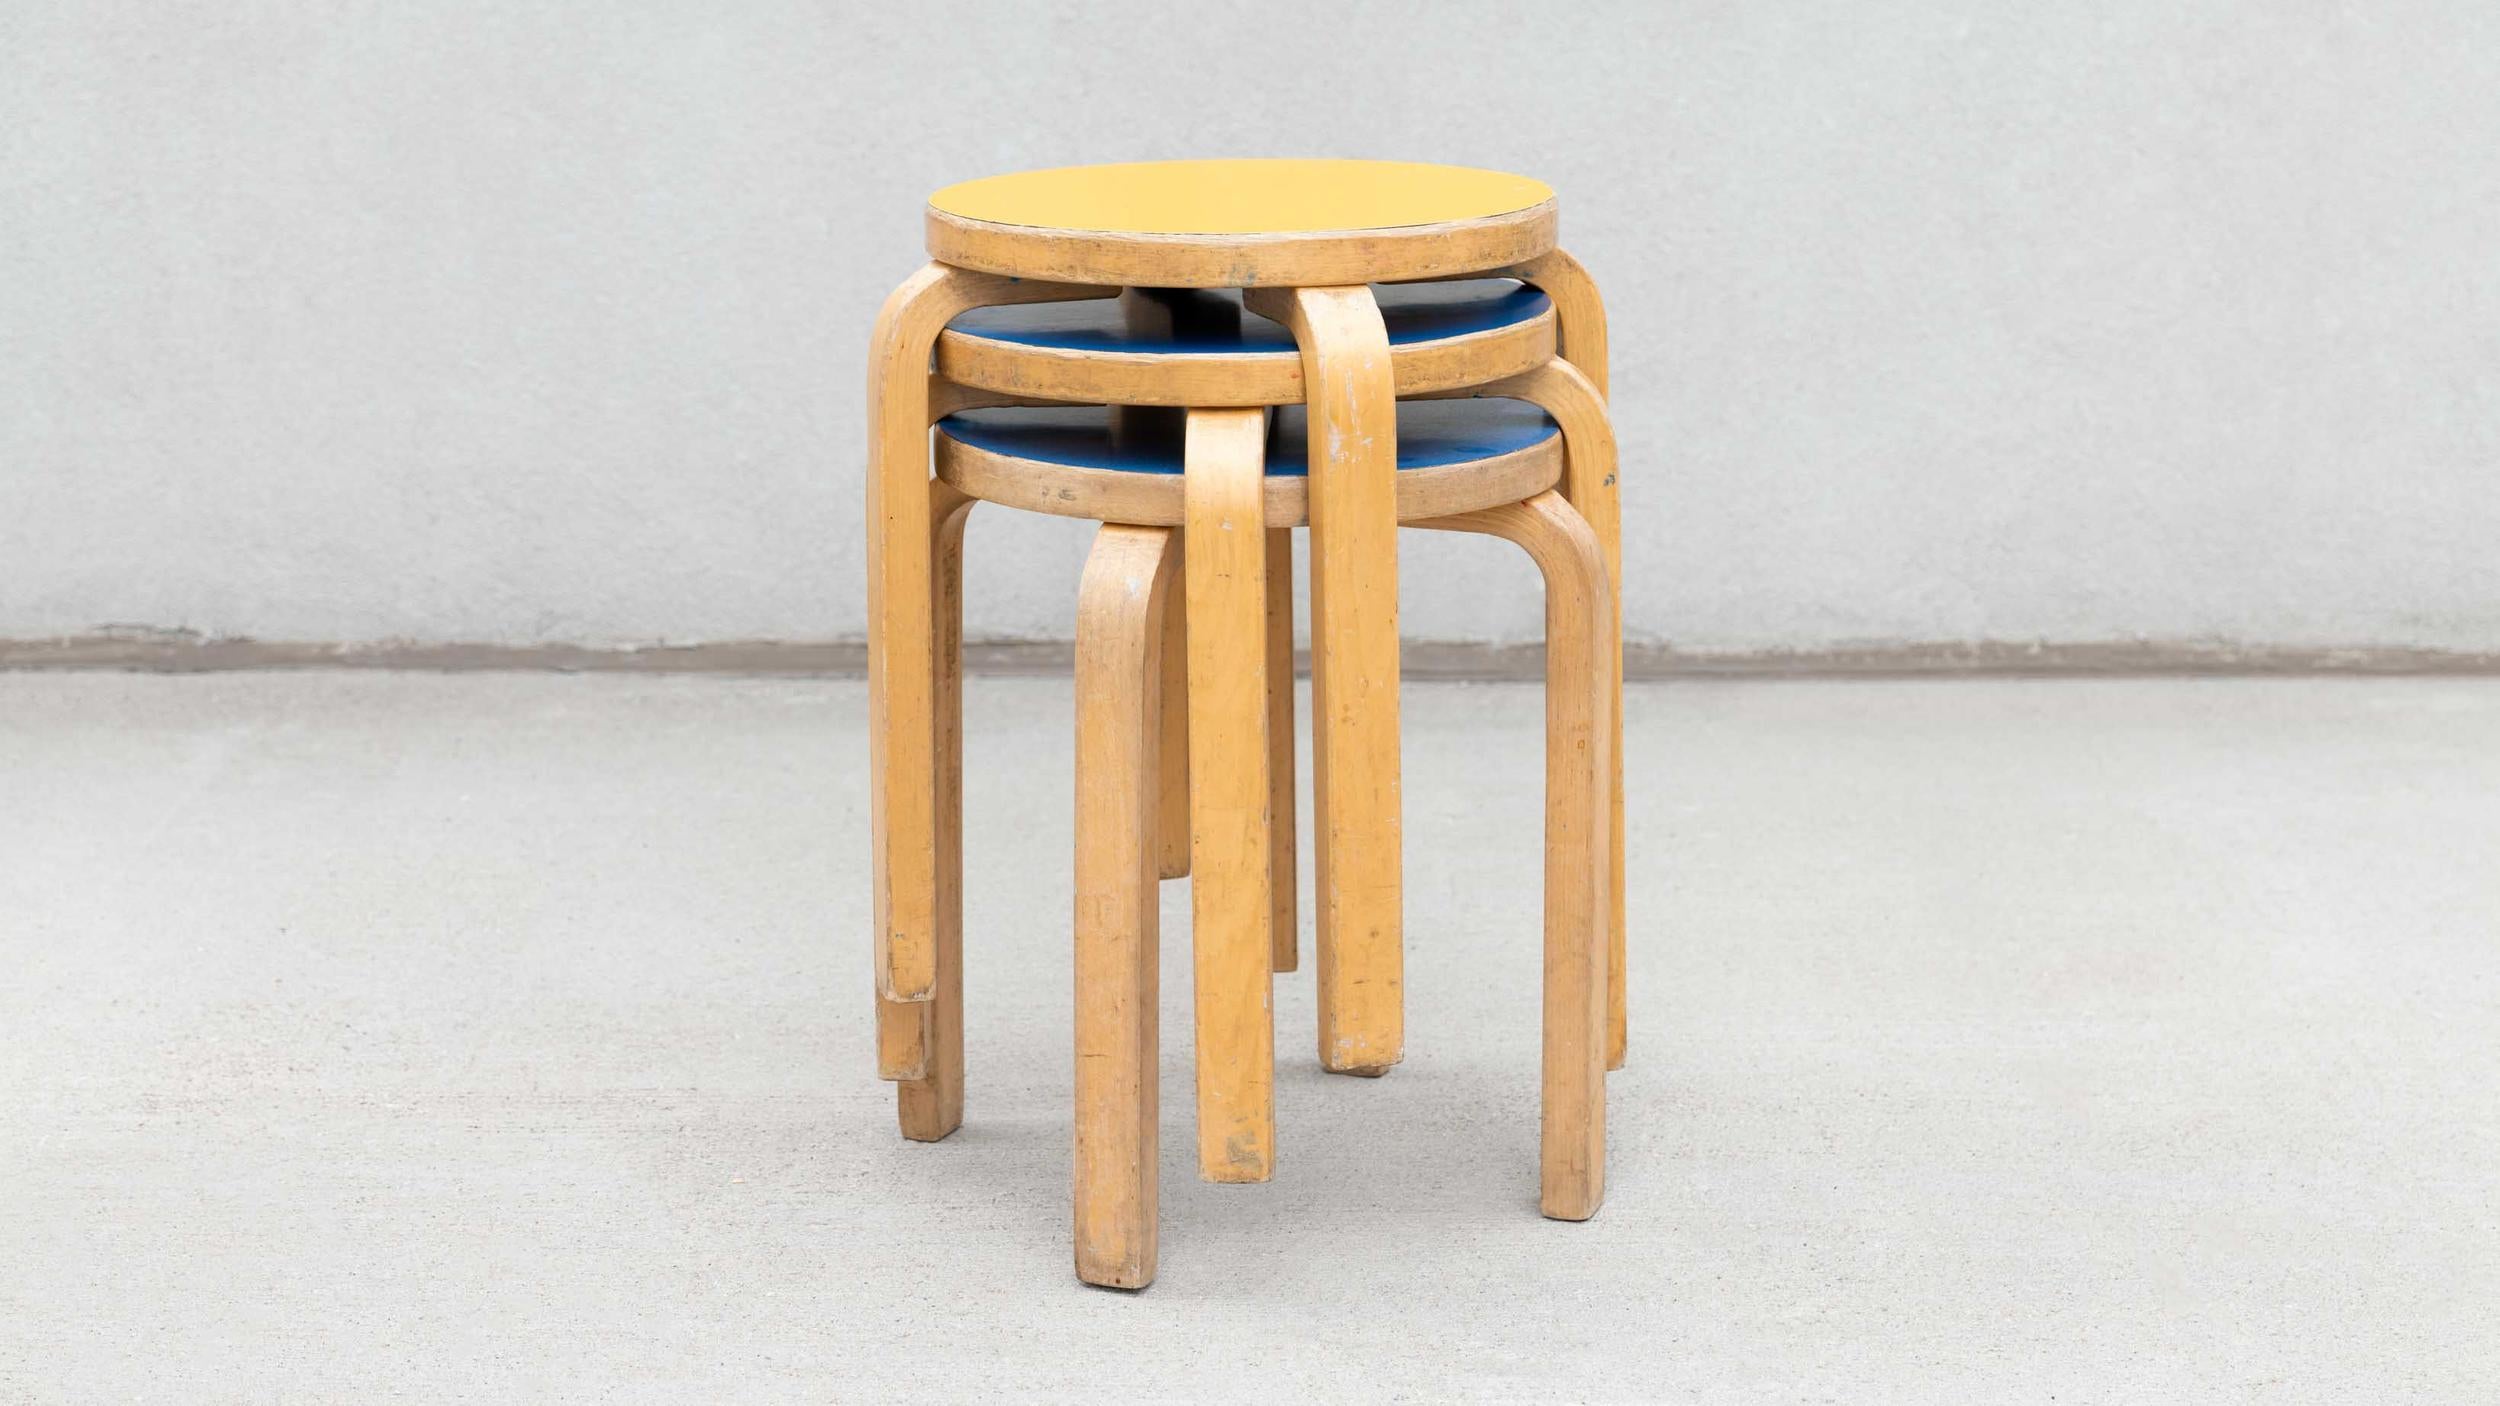 STOOL E60
ALVAR AALTO FOR ARTEK C.1950

Early model E60 stools in blue linoleum by Alvar Aalto for Artek. Rare color and healthy patina. 

color: blue
materials: birch wood, linoleum
origin: Finland

height: 17.25 in.
width:  15 in.
